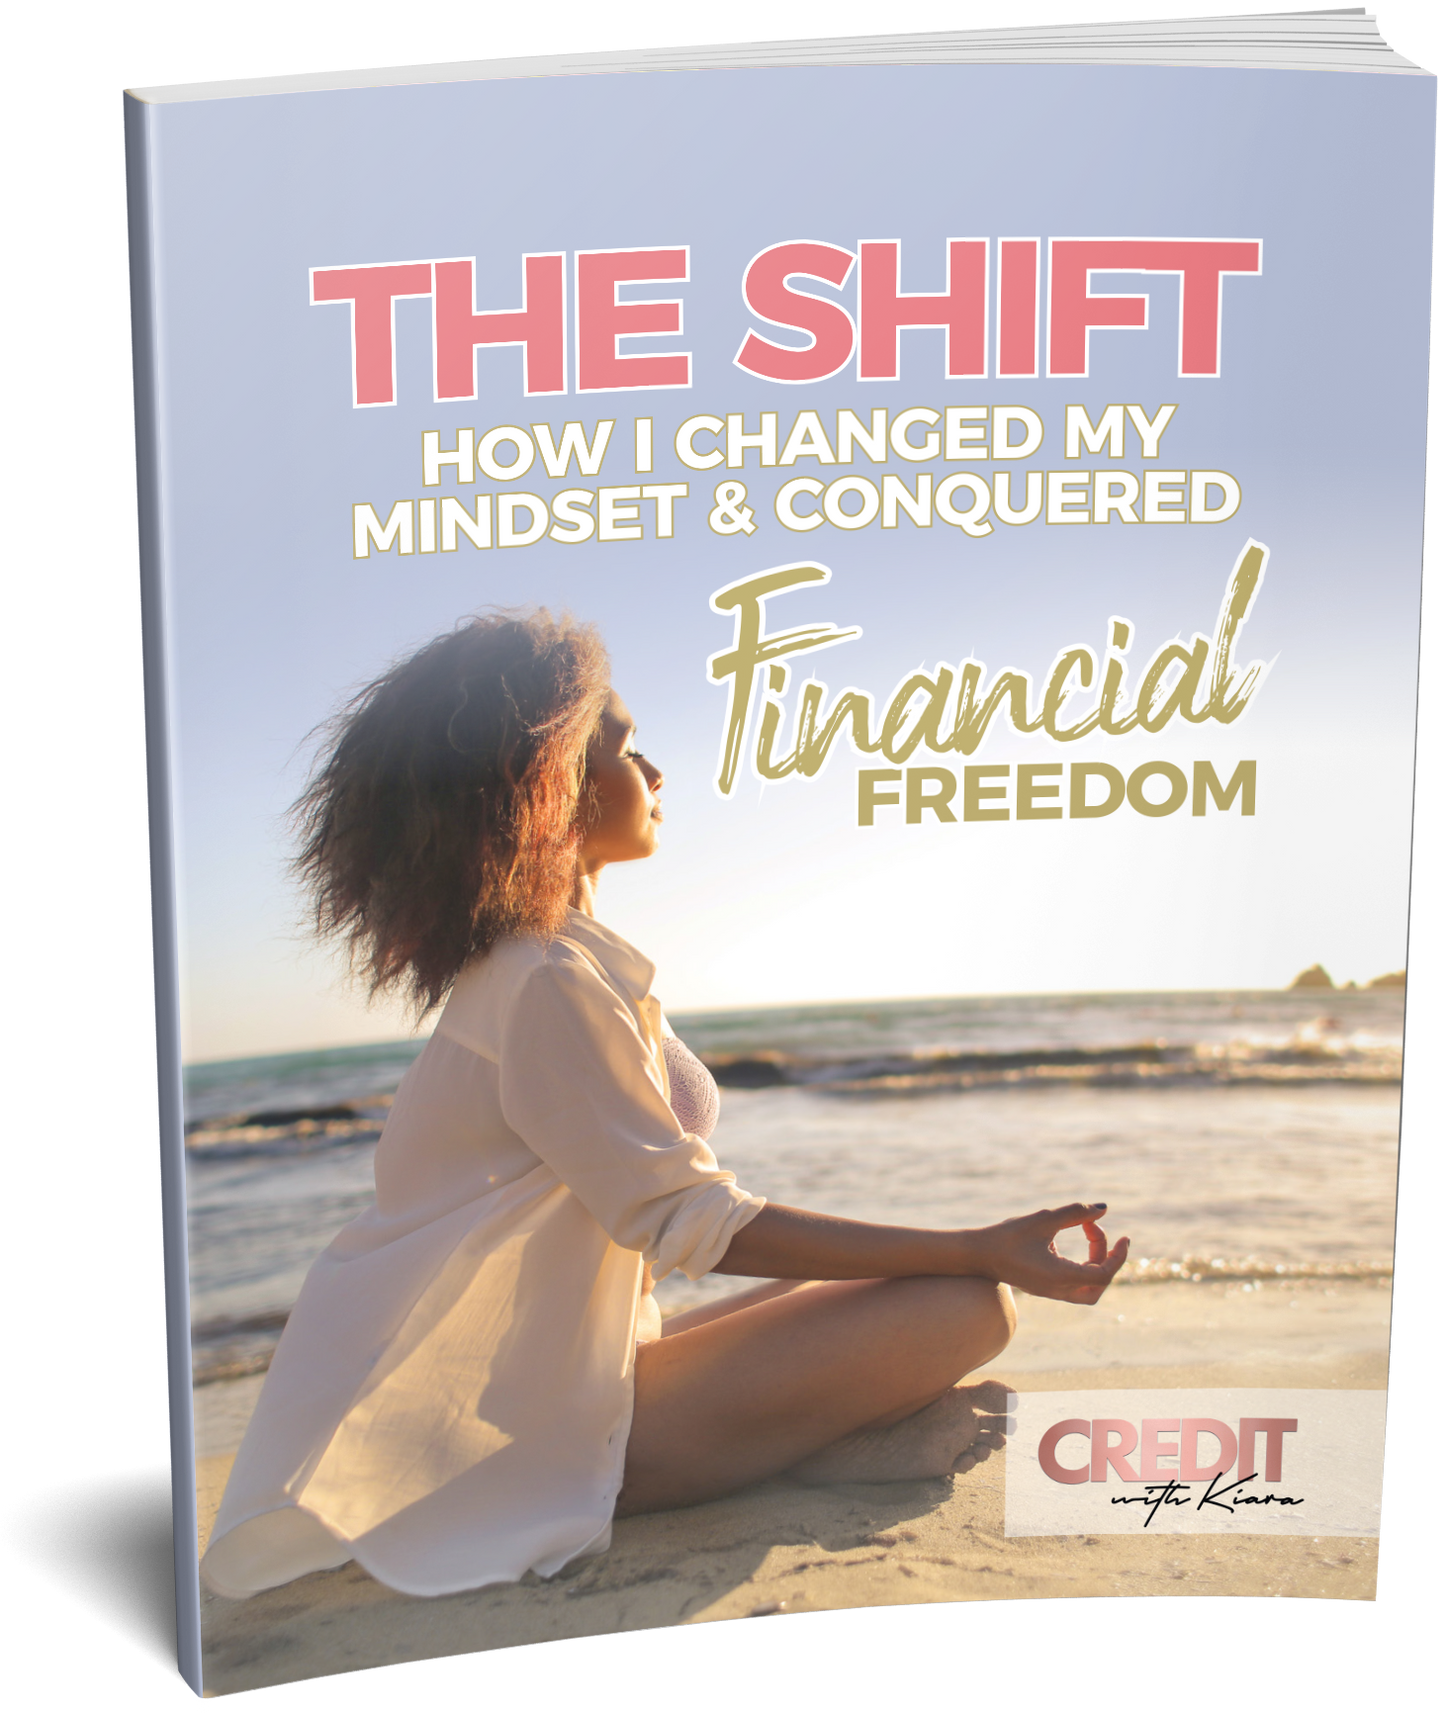 The Shift: How I Changed My Mindset & Conquered Financial Freedom - Credit With Kiara